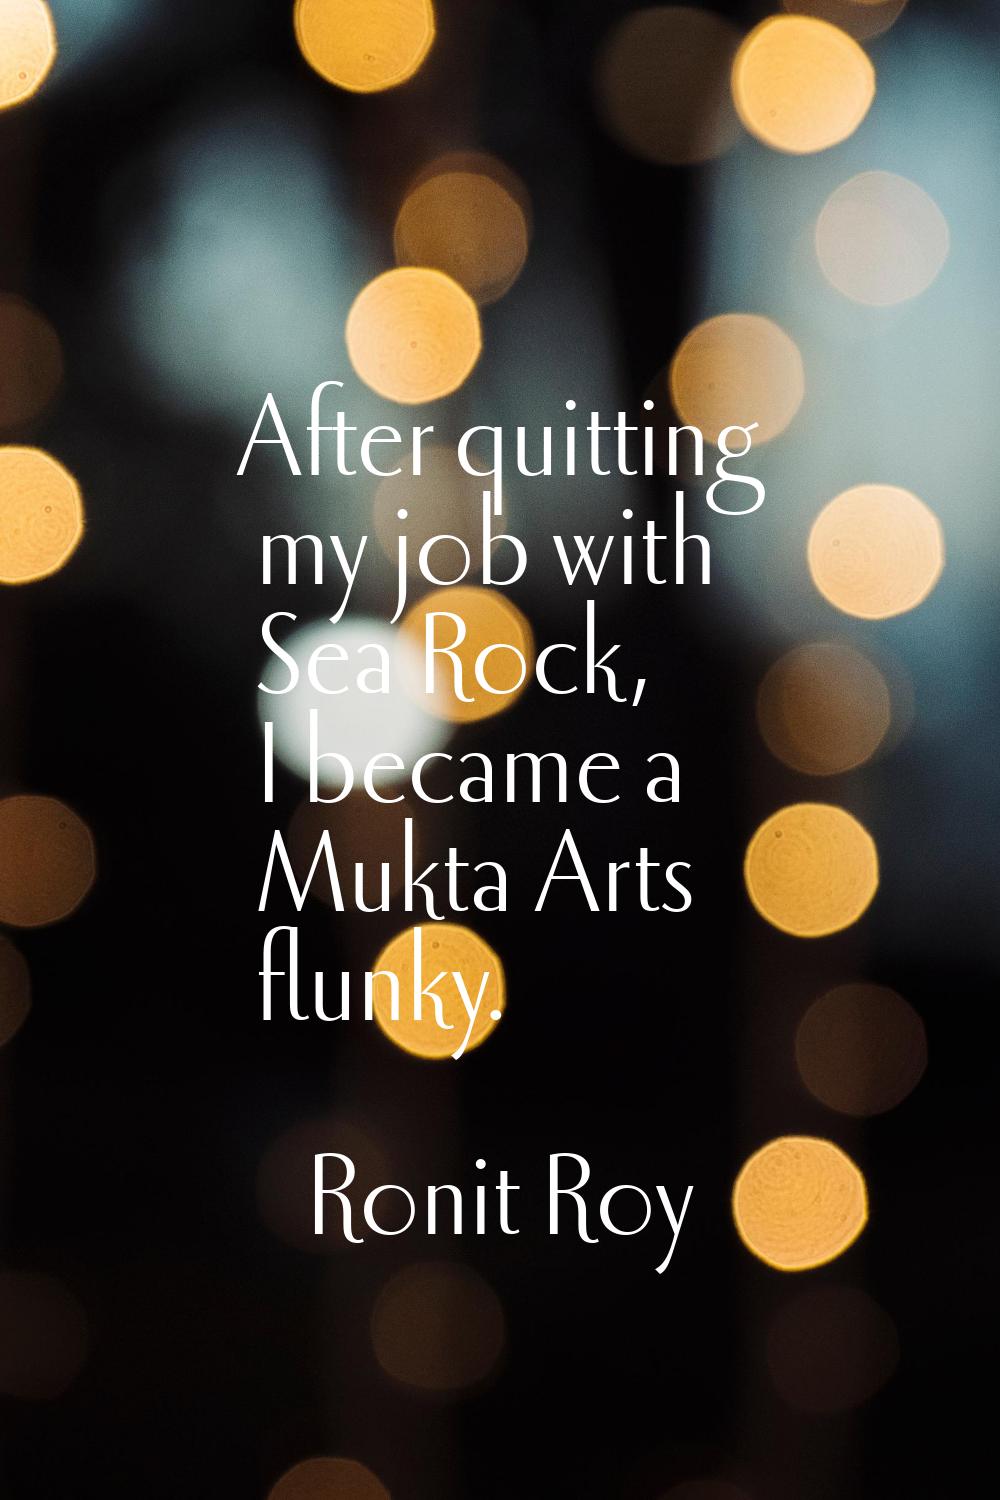 After quitting my job with Sea Rock, I became a Mukta Arts flunky.